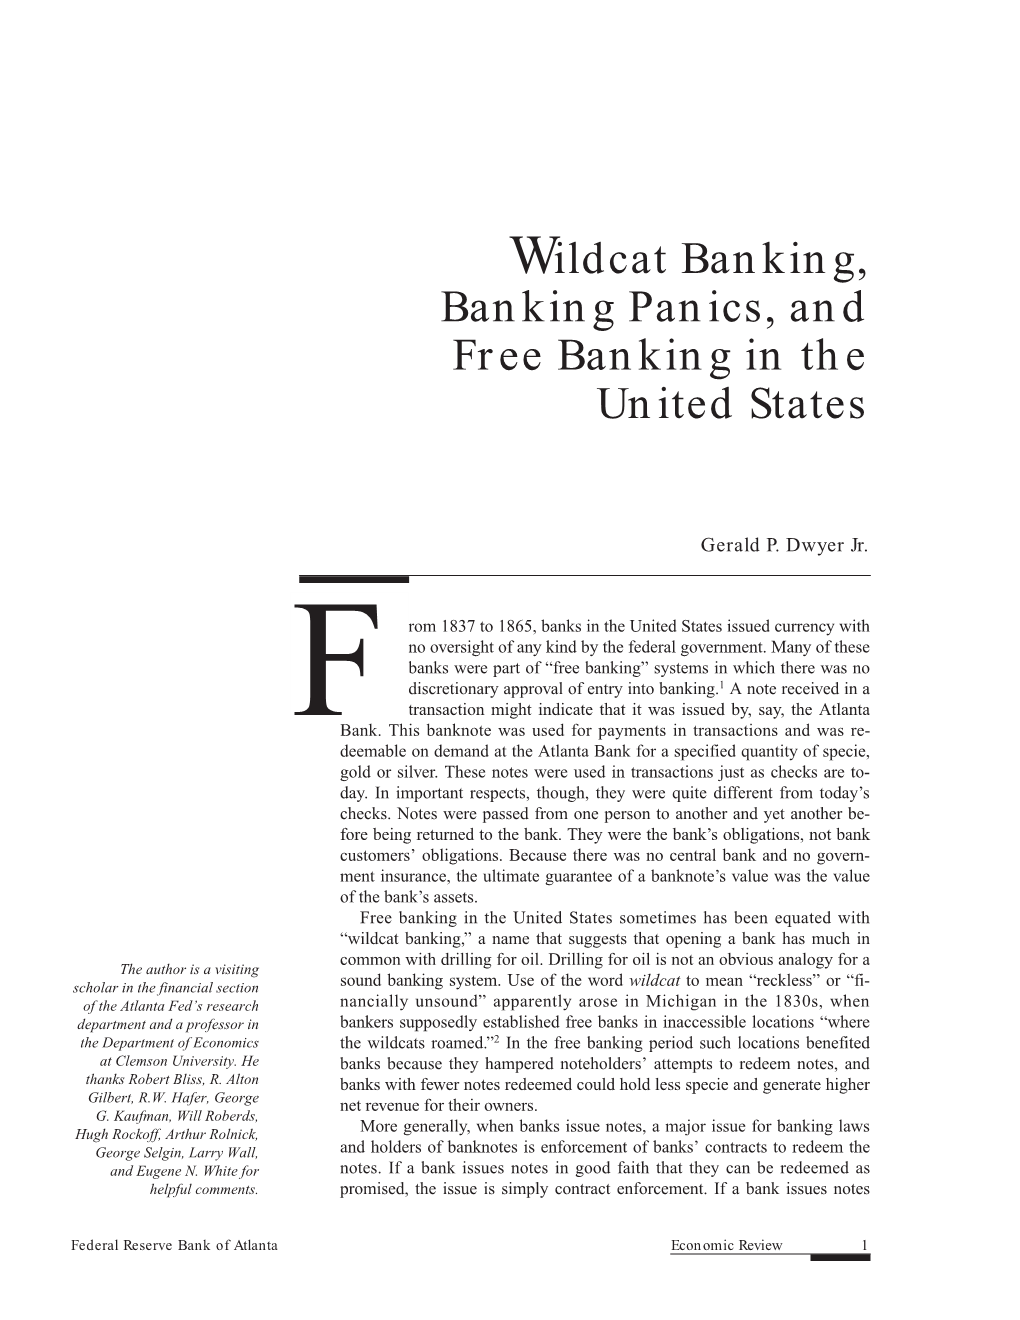 Wildcat Banking, Banking Panics, and Free Banking in the United States